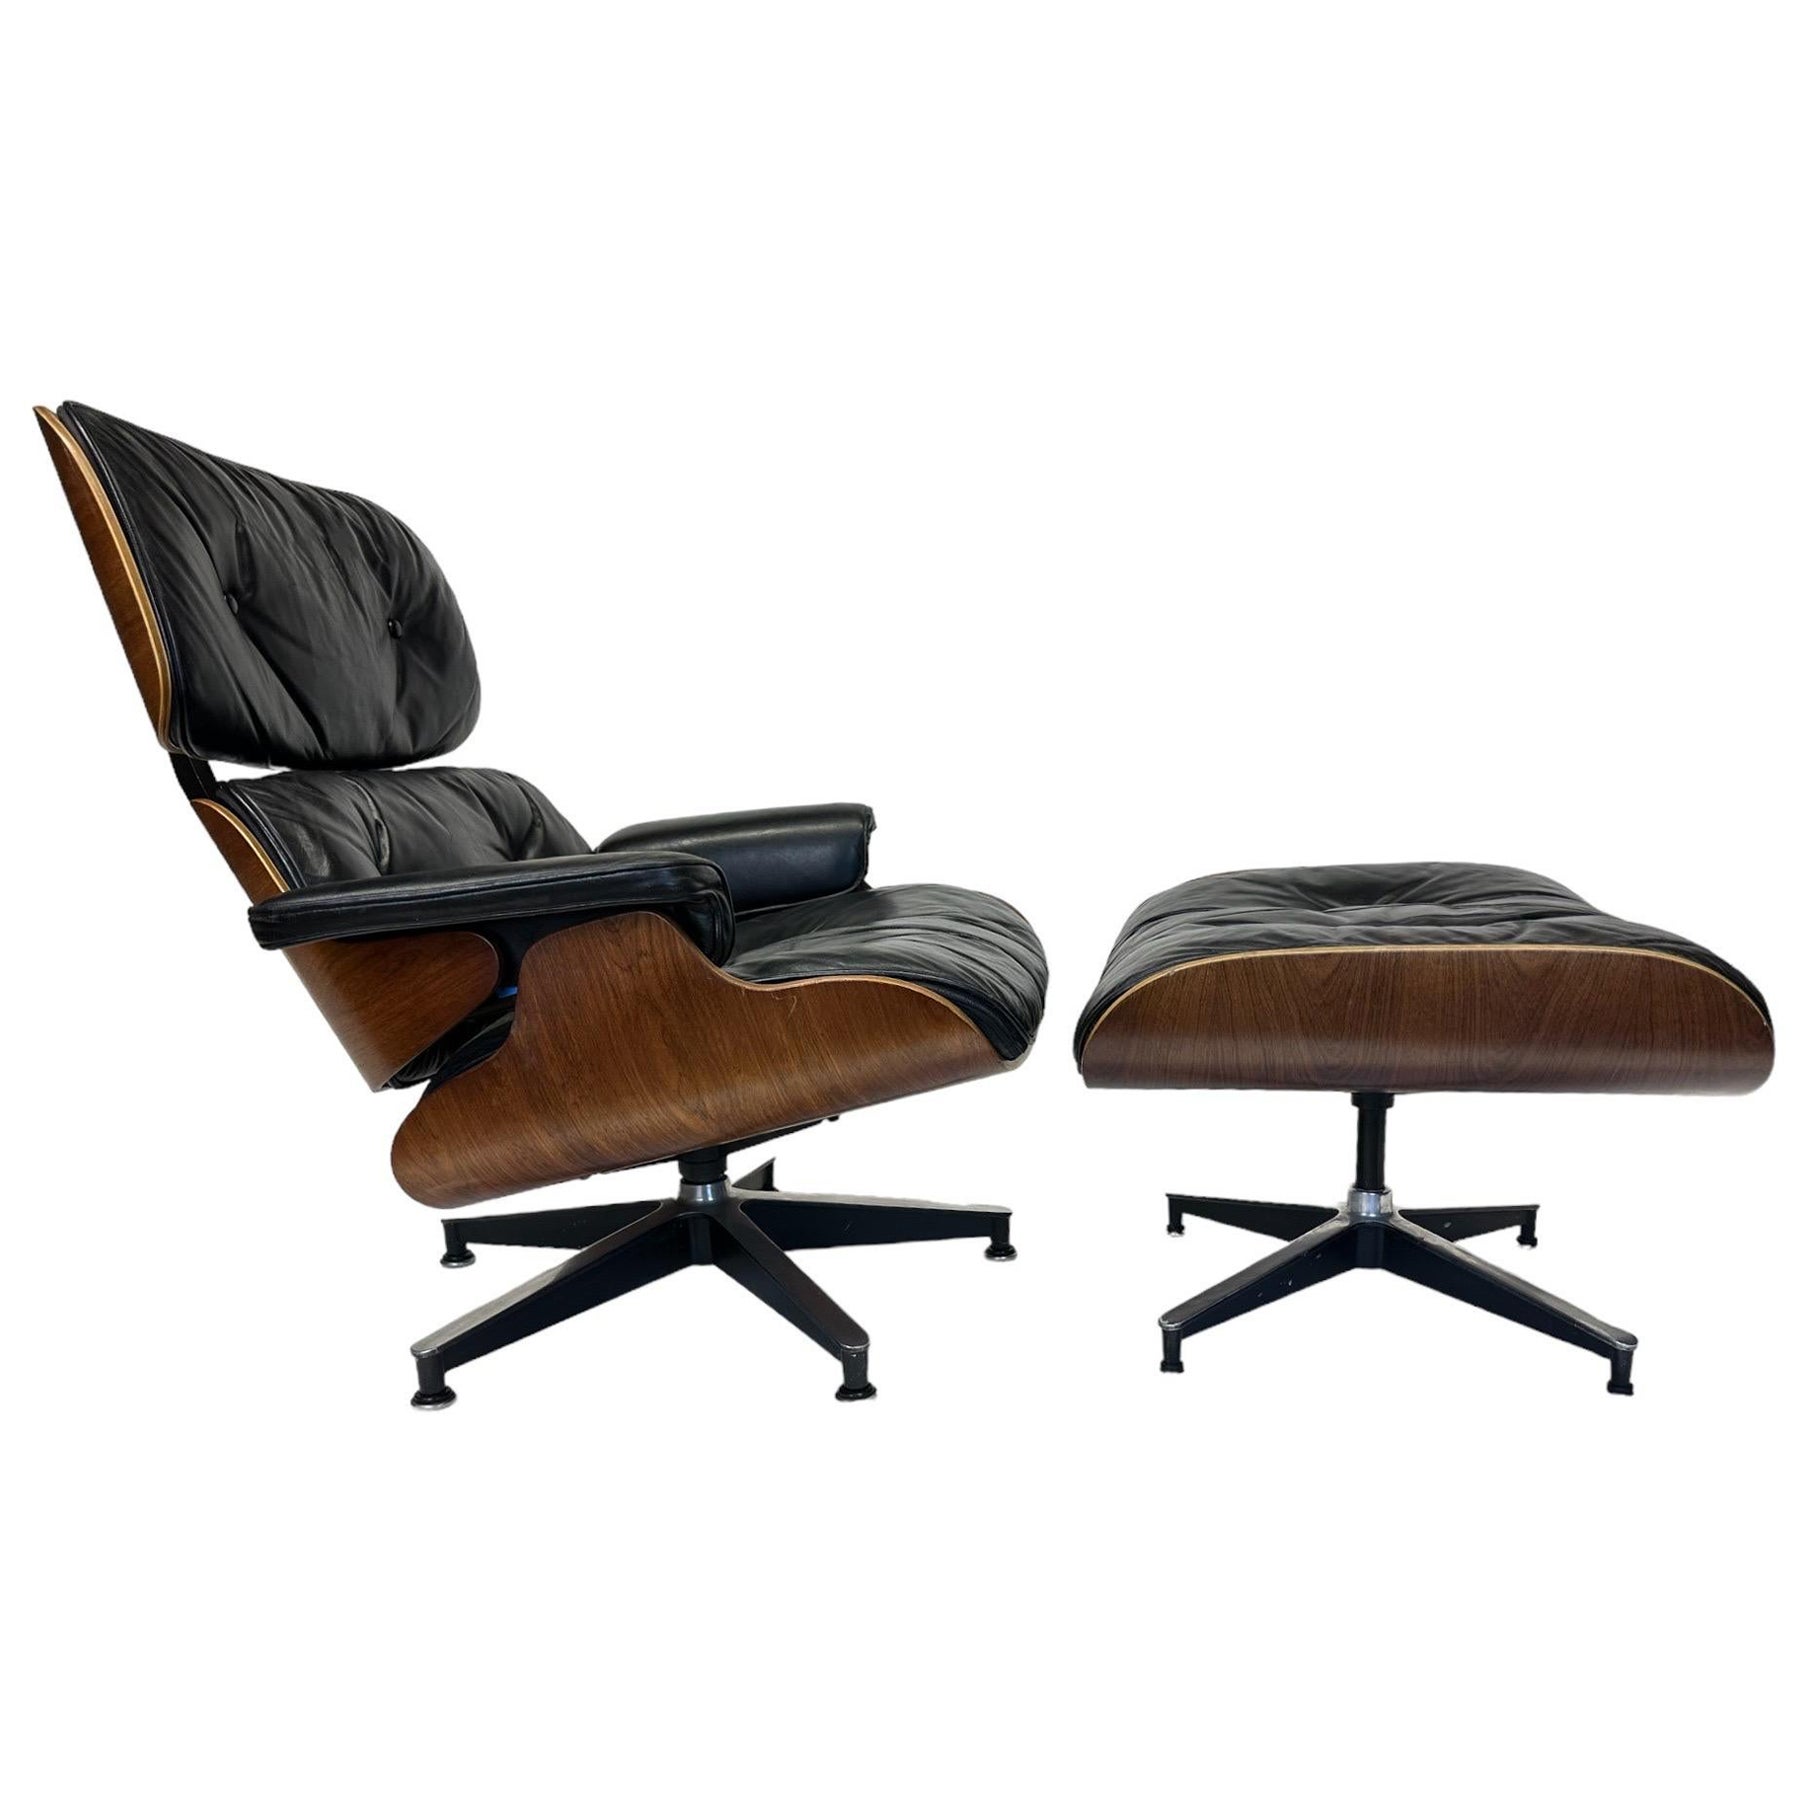 1960s Herman Miller Eames Lounge chair and Ottoman